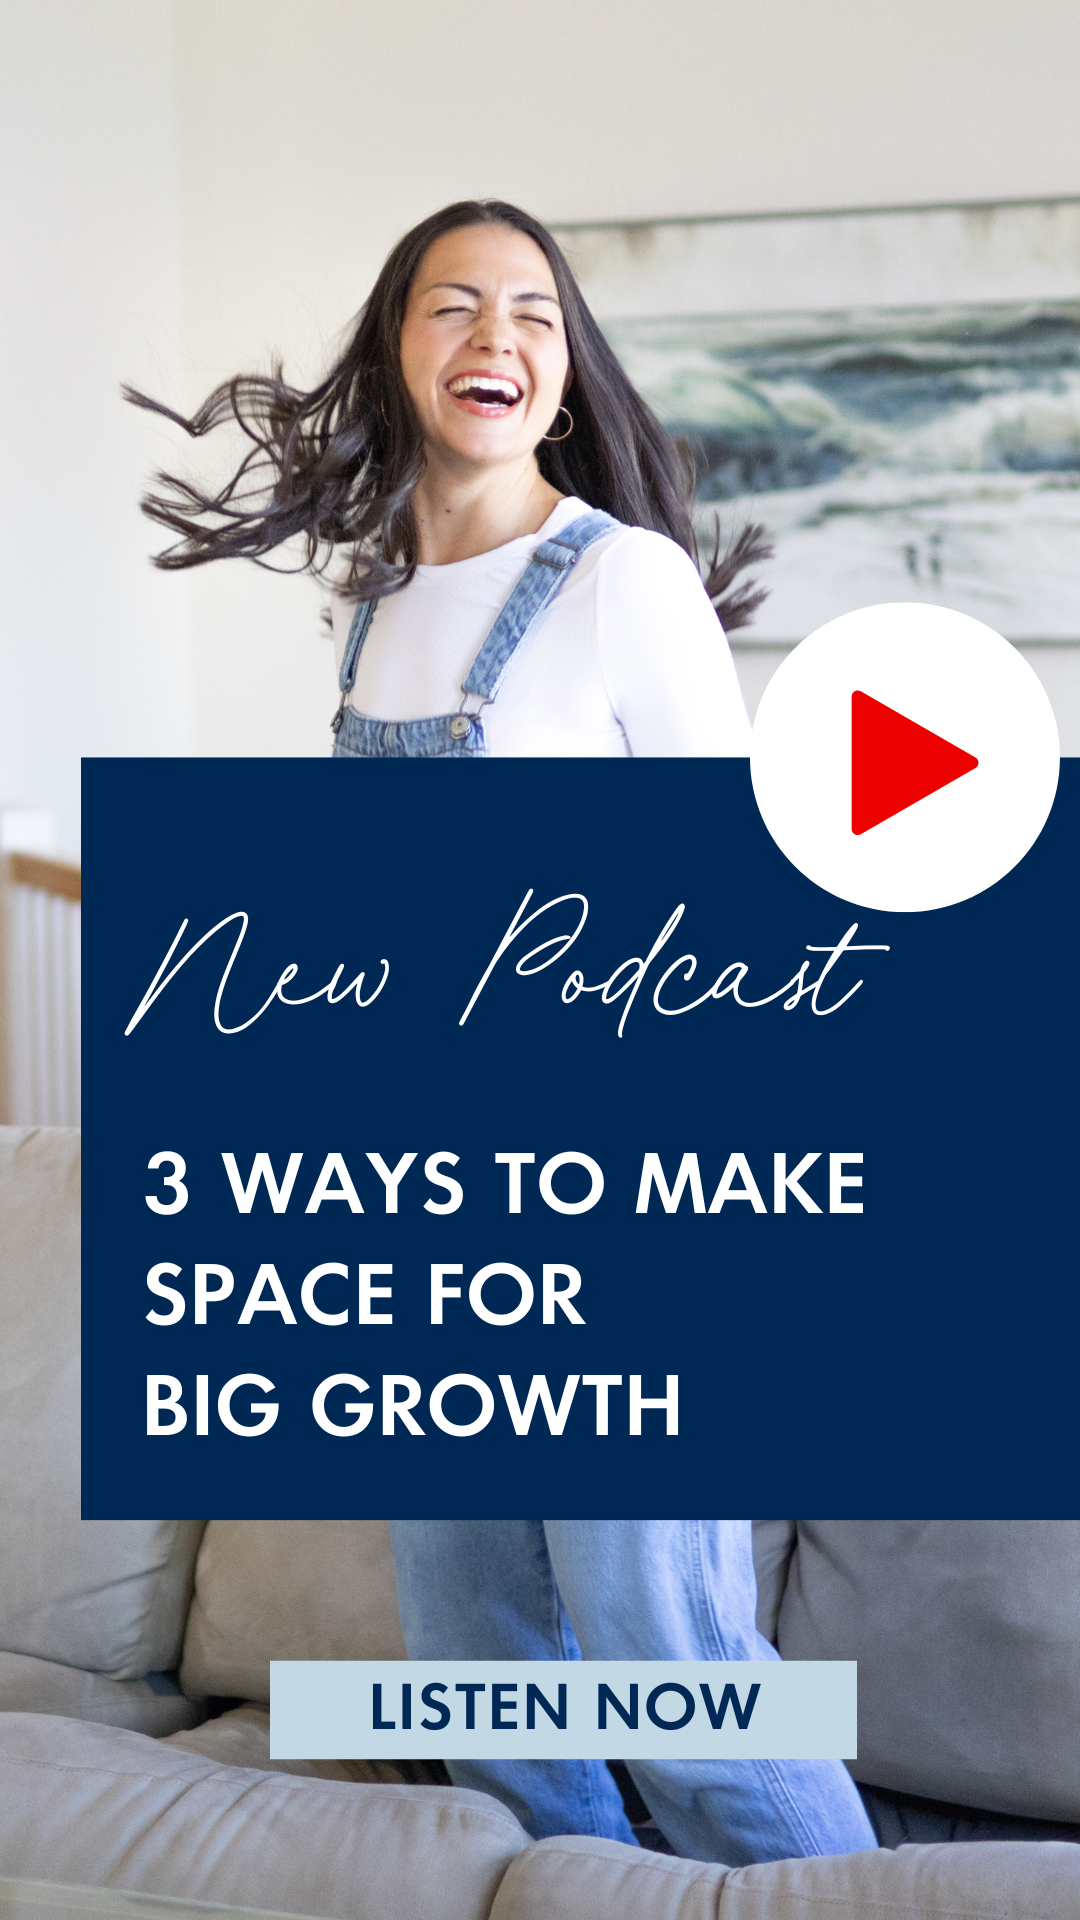 3 ways to make space for big growth